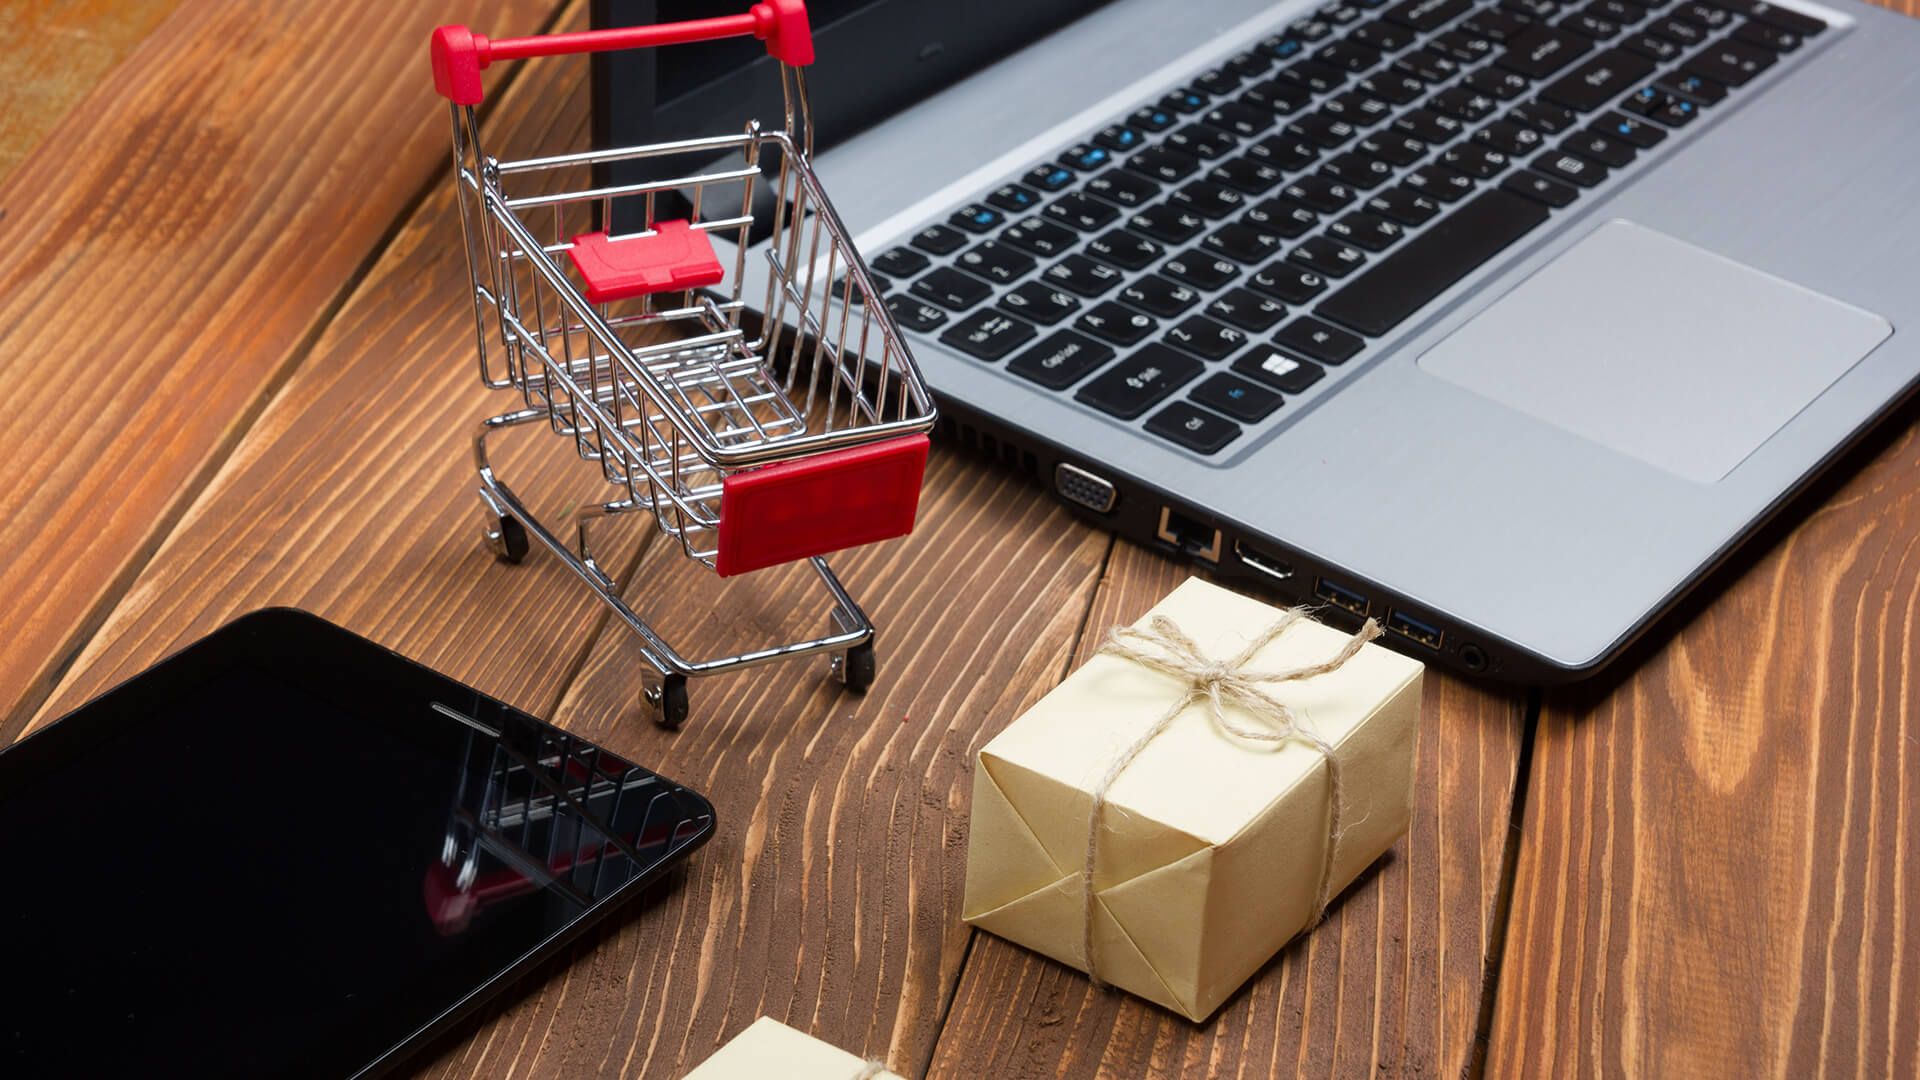 95% of online shoppers say a positive return experience drives loyalty [Report]